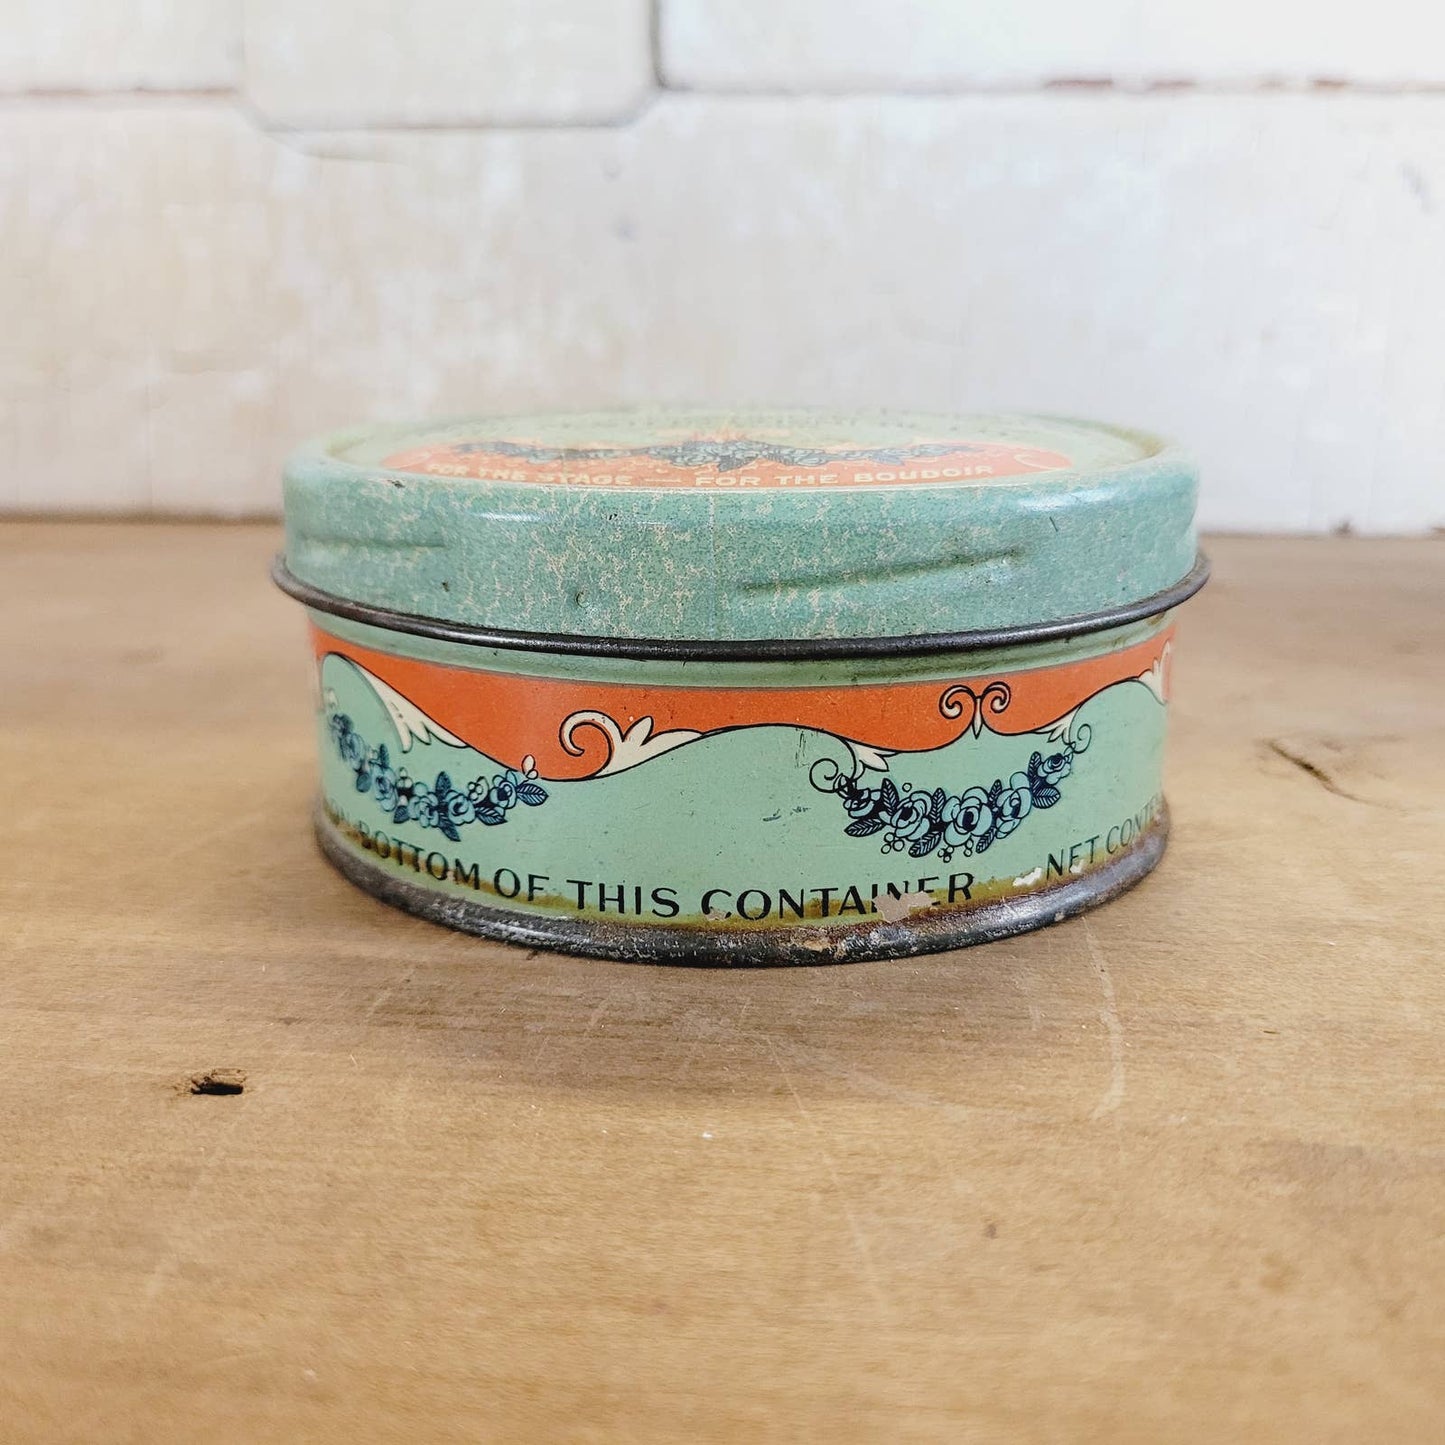 1920s Stein's Face Powder Tin For the Stage or Boudoir